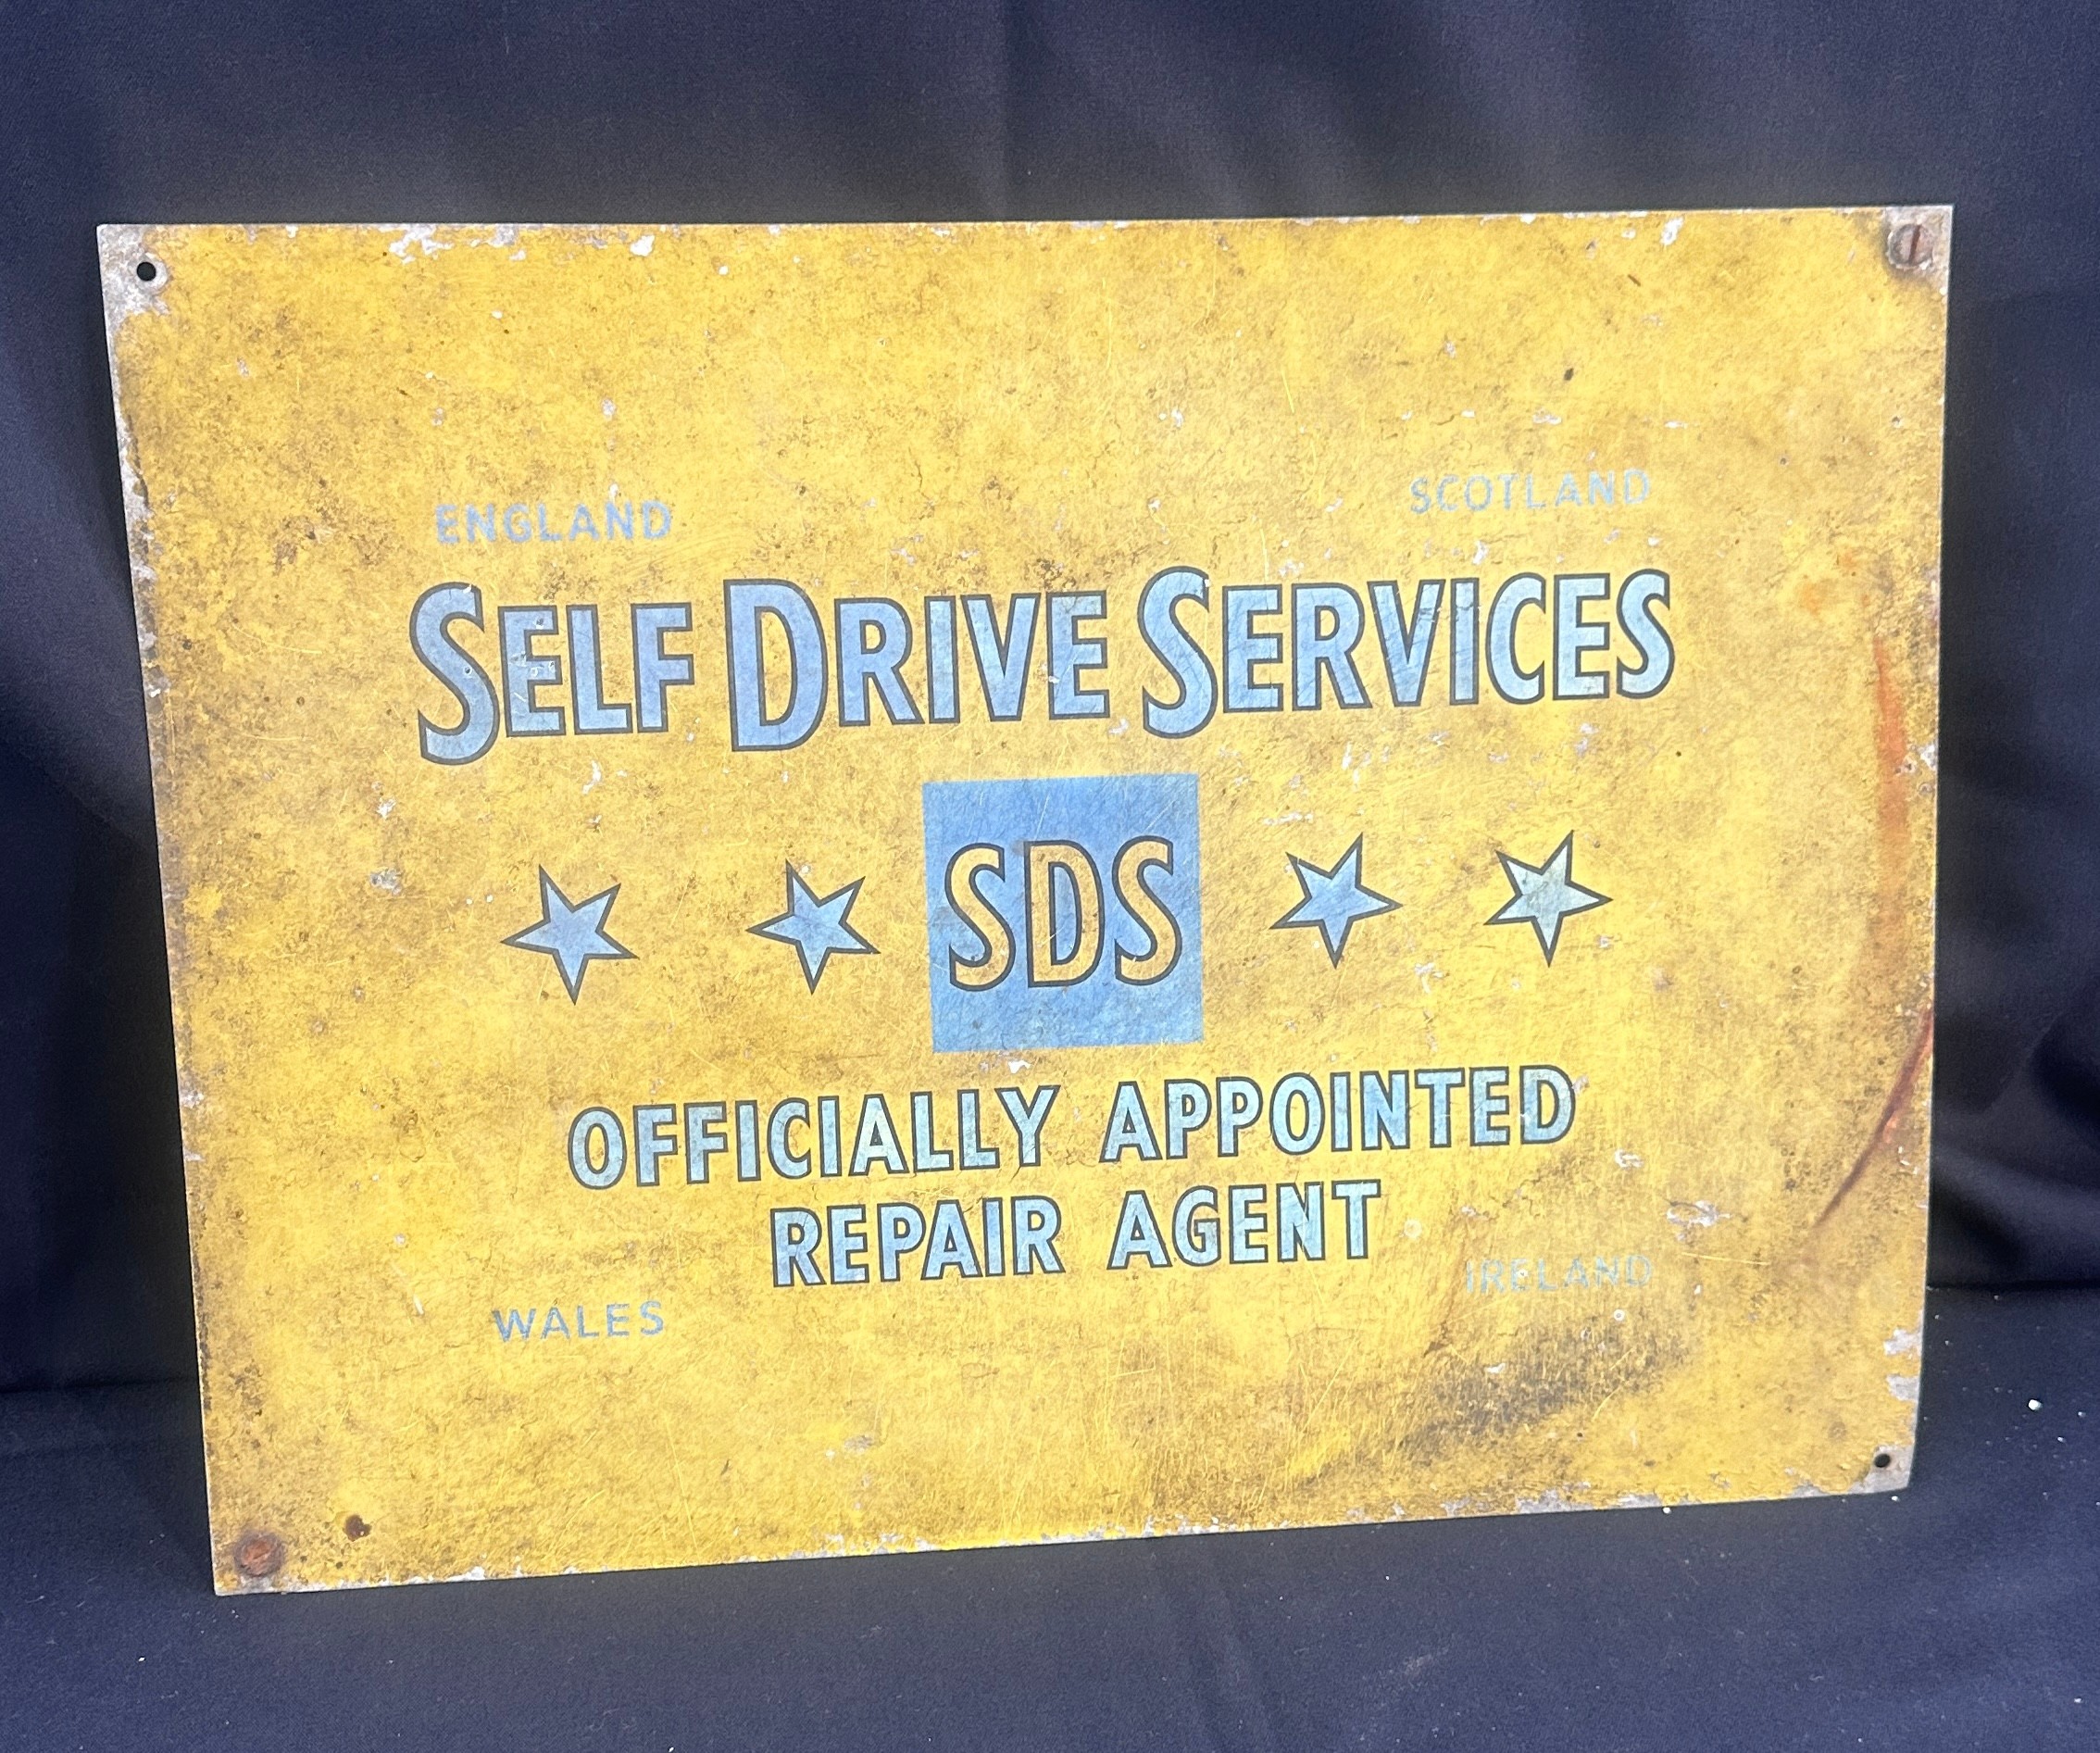 Vintage ' Self Drive Service SDS repair agent' metal sign measures approx 14 x 12 inches - Image 3 of 4